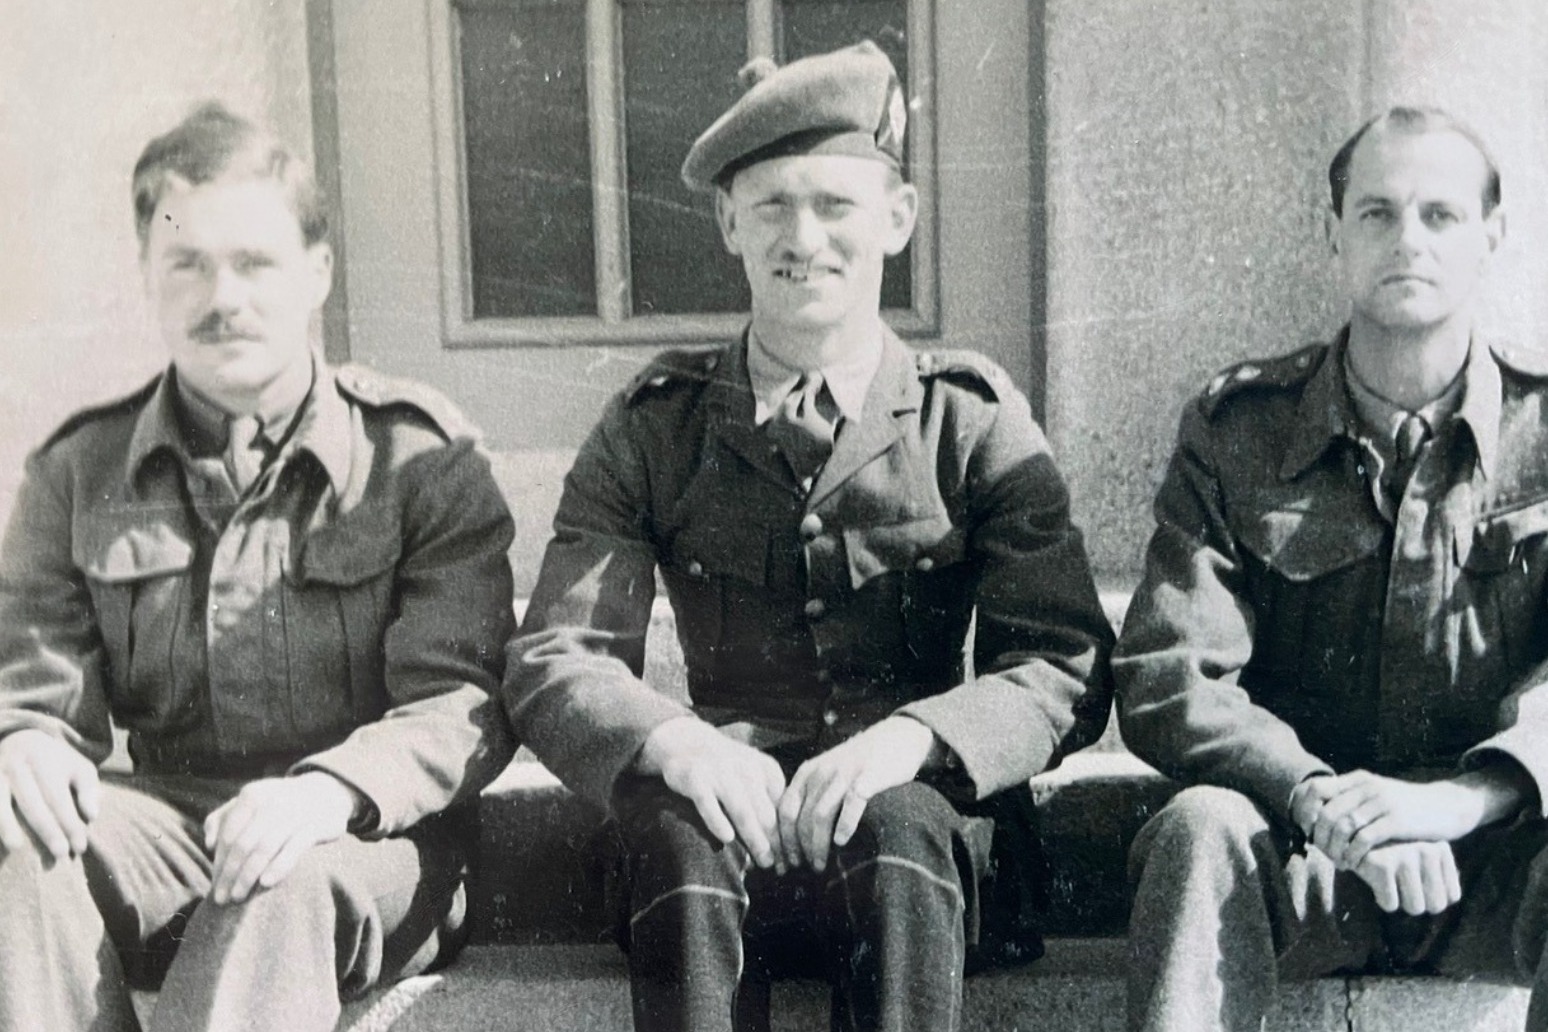 Oldest surviving veteran of The Royal Scots dies aged 104 